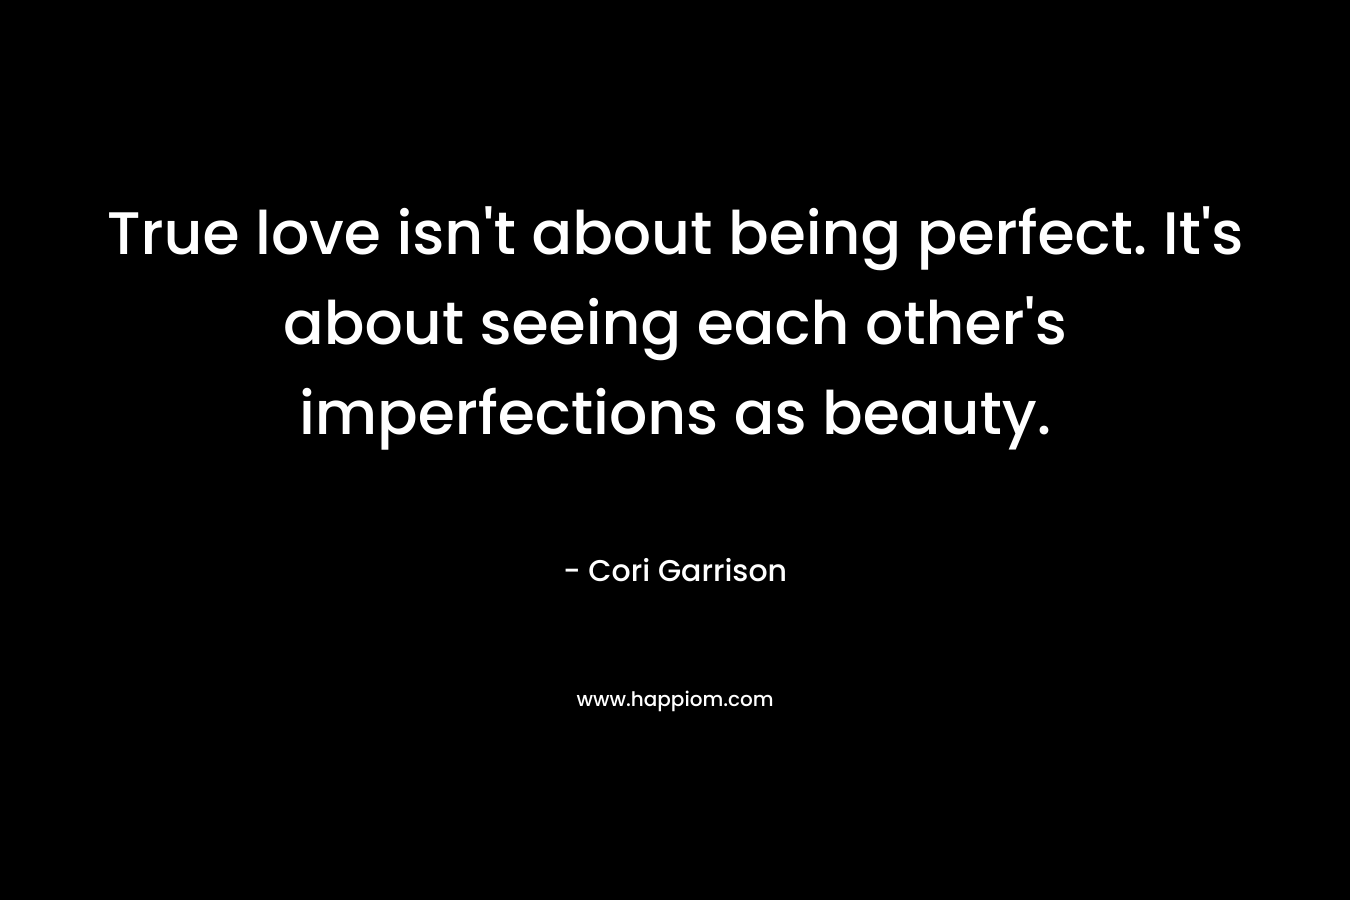 True love isn’t about being perfect. It’s about seeing each other’s imperfections as beauty. – Cori Garrison